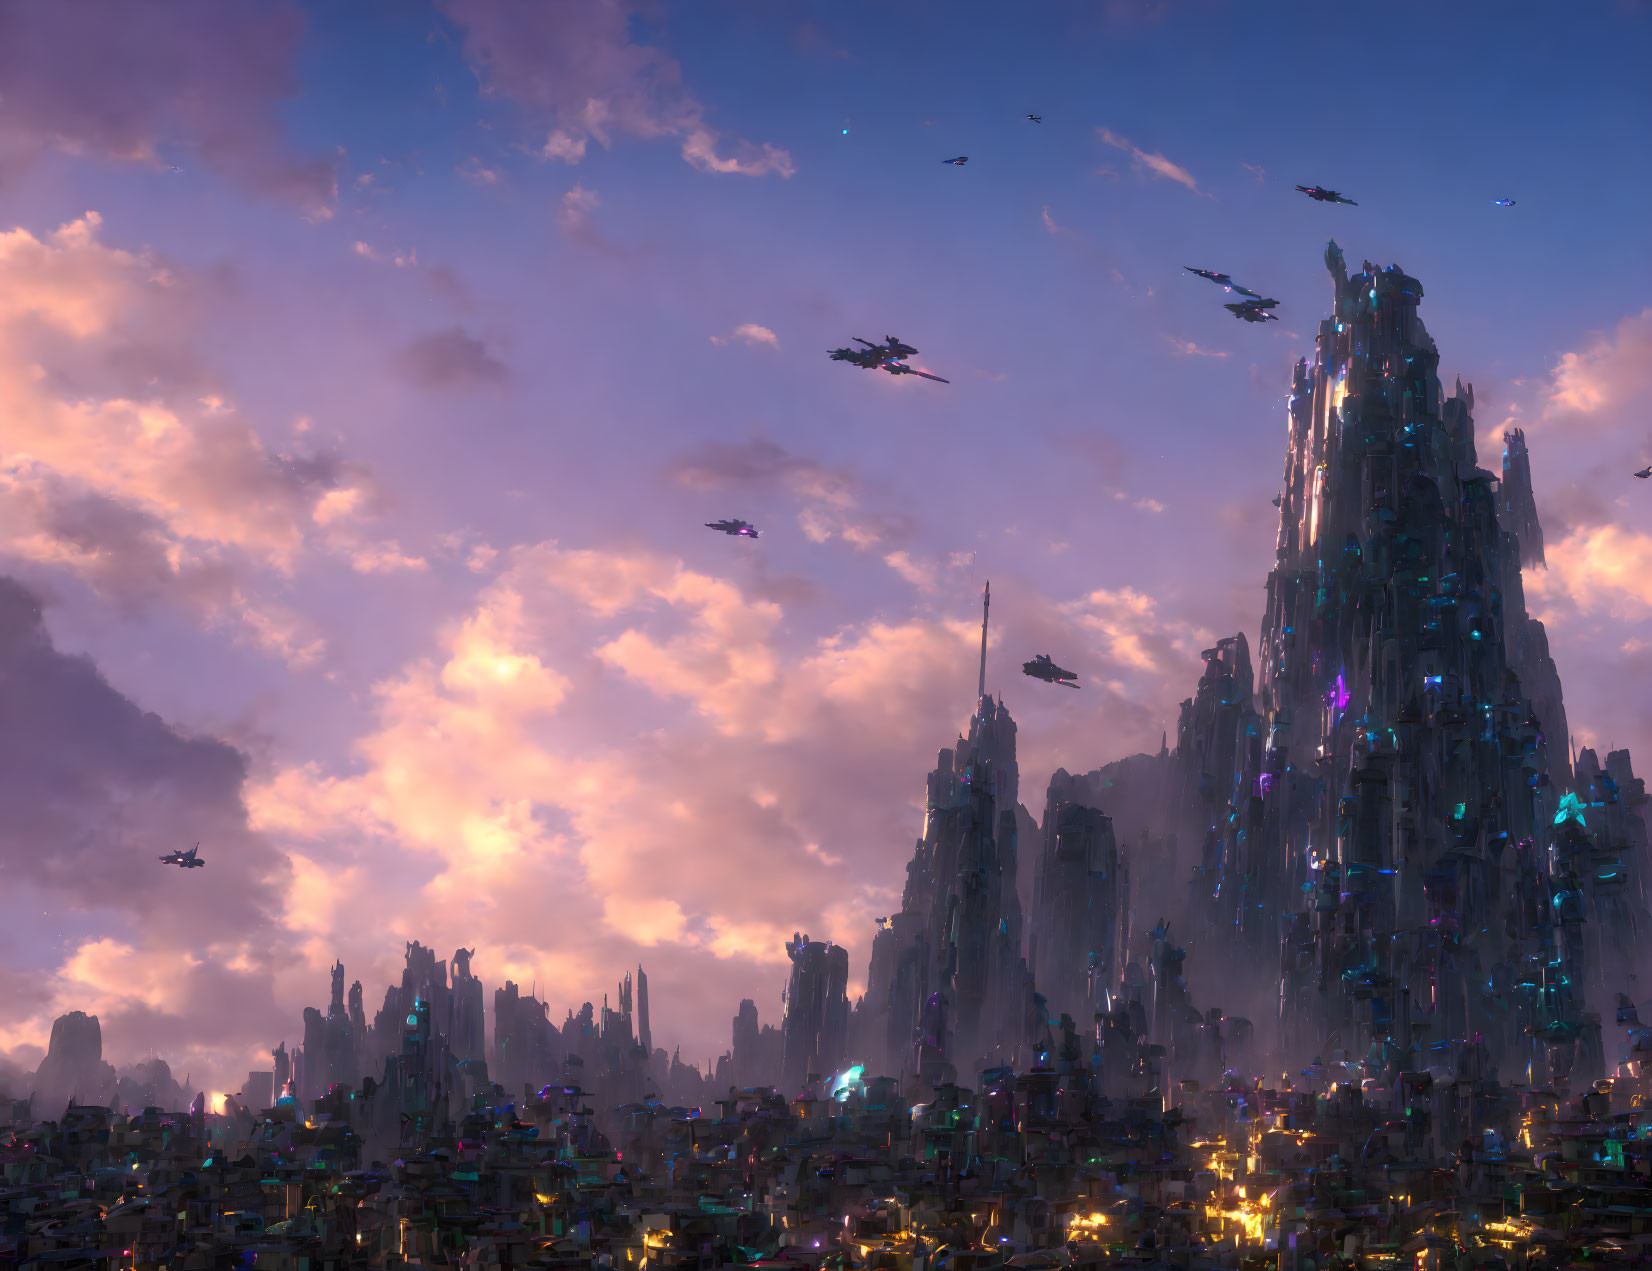 Futuristic cityscape with towering spires and flying vehicles at dusk